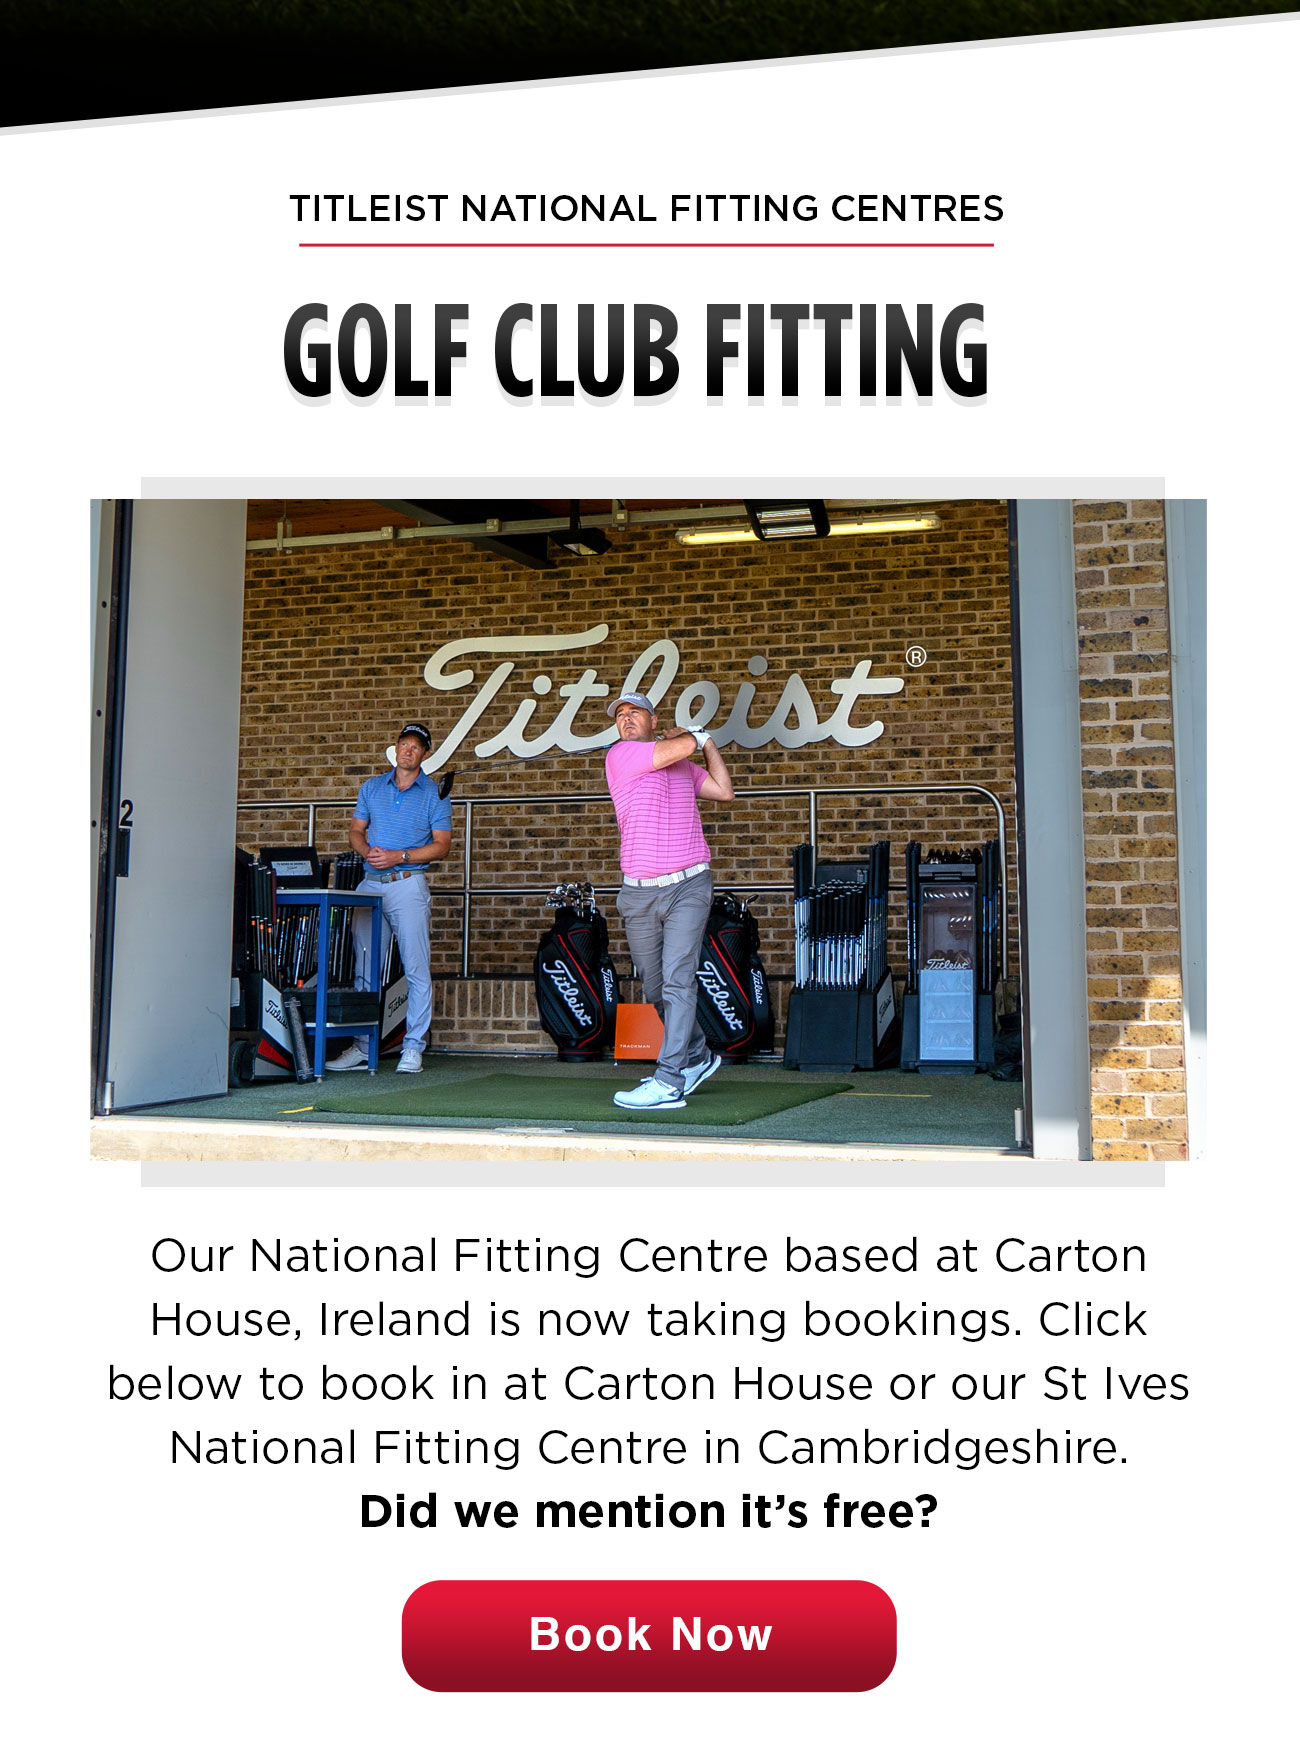 National Fitting Centres